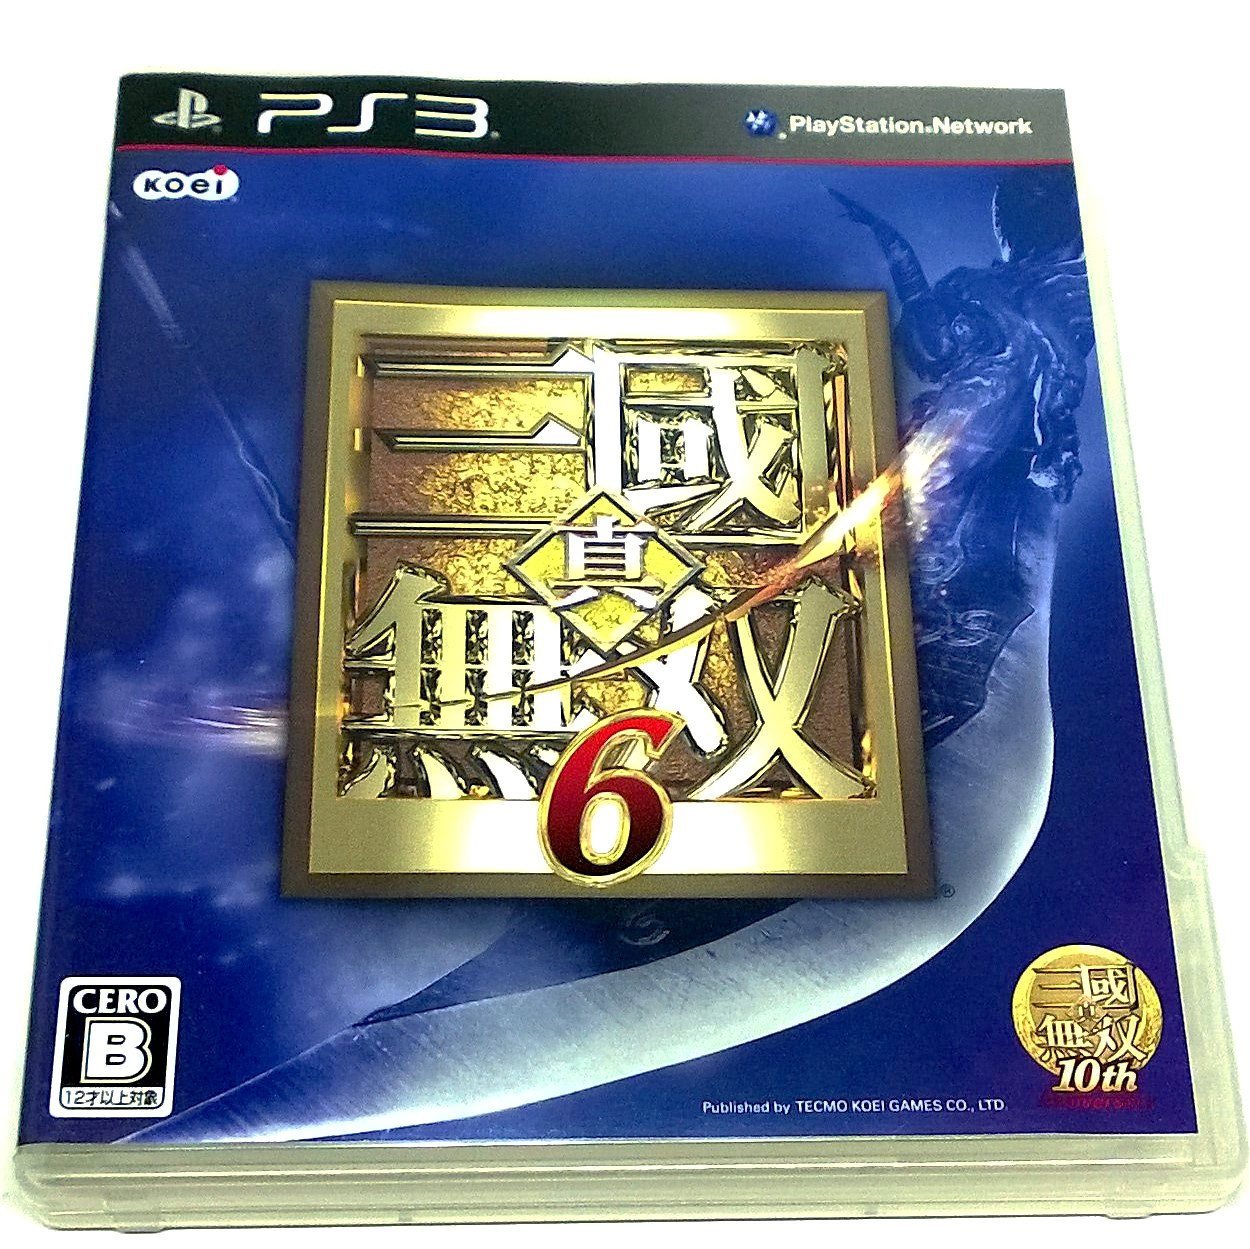 Shin Sangoku Musou 6 for PlayStation 3 (Import) - Front of case